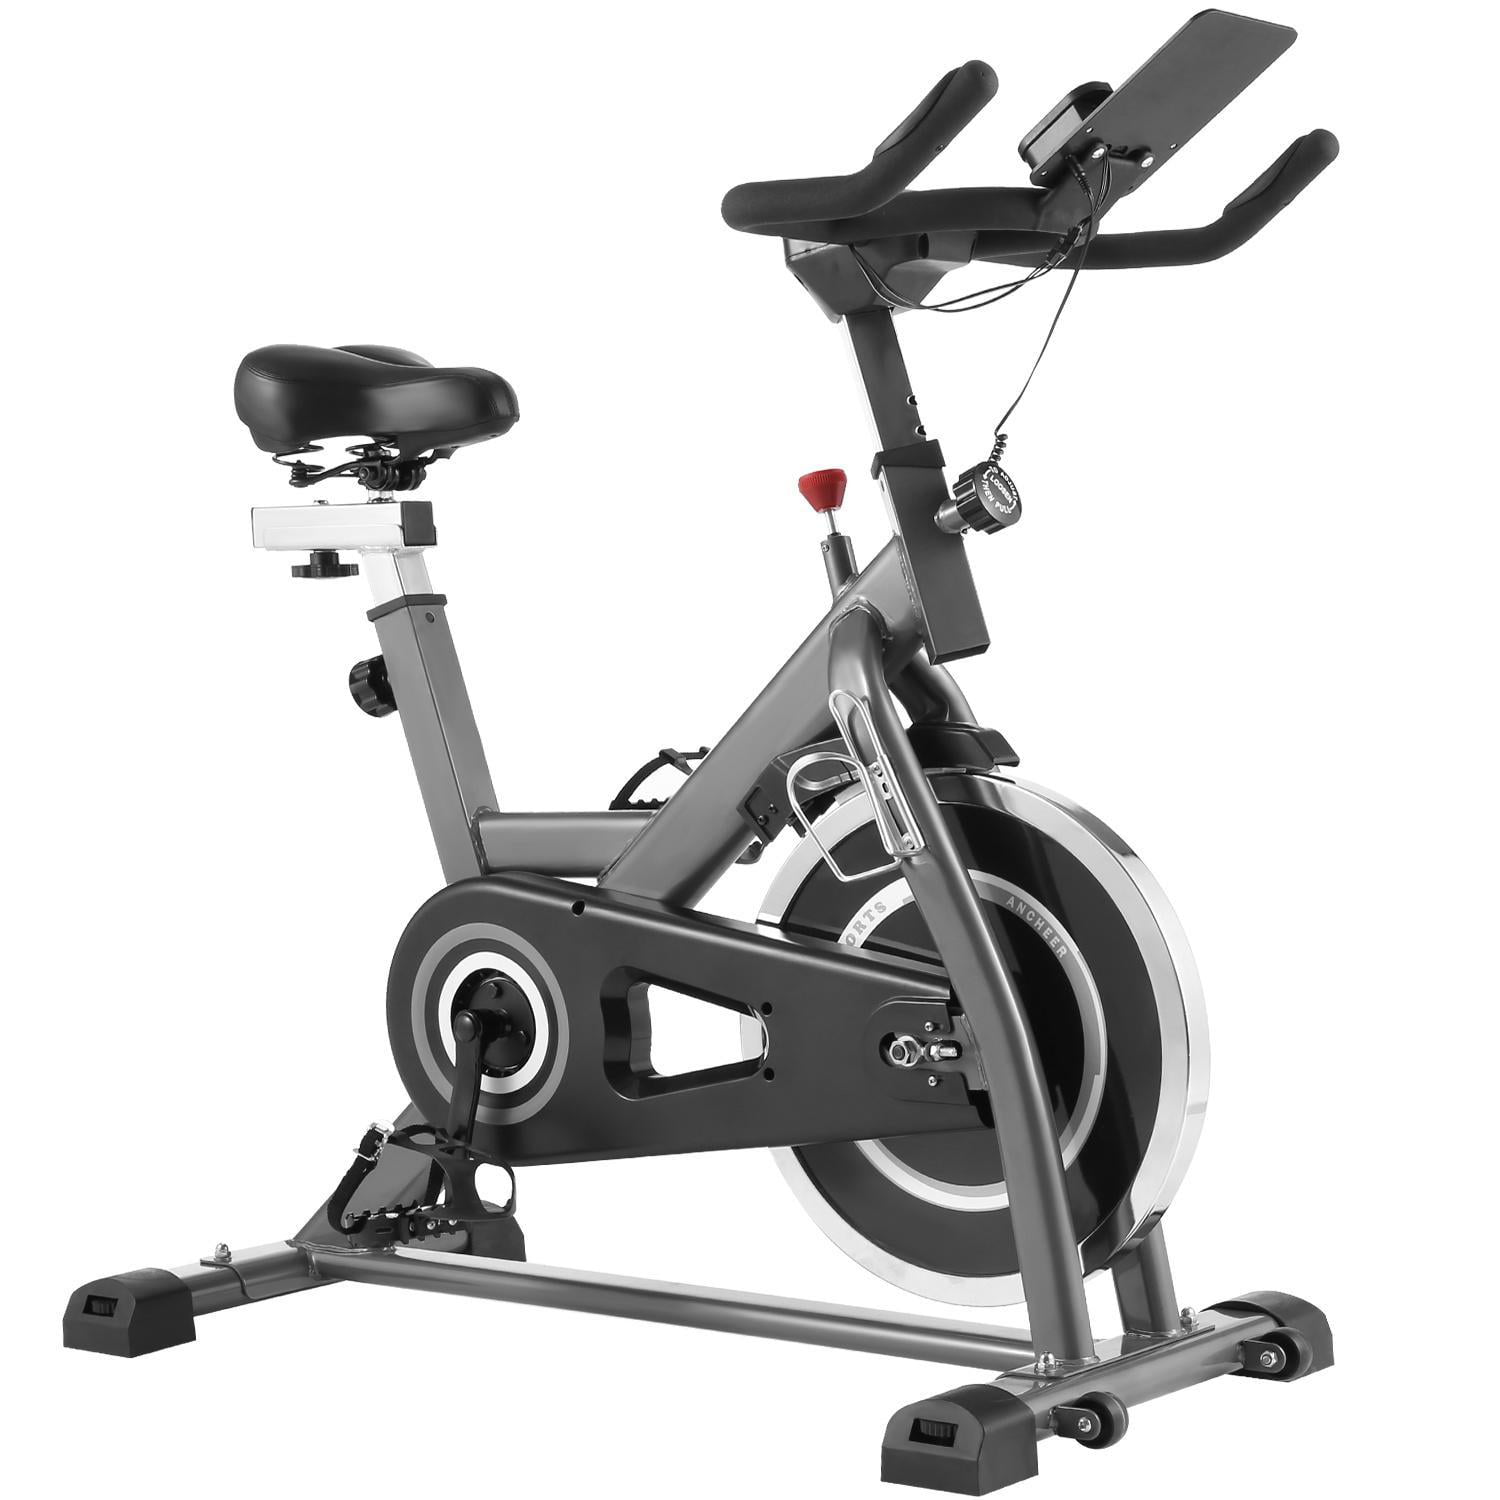 Details about   Black Exercise Stationary Bike Cycling Home Gym Cardio Workout Indoor Fitness US 